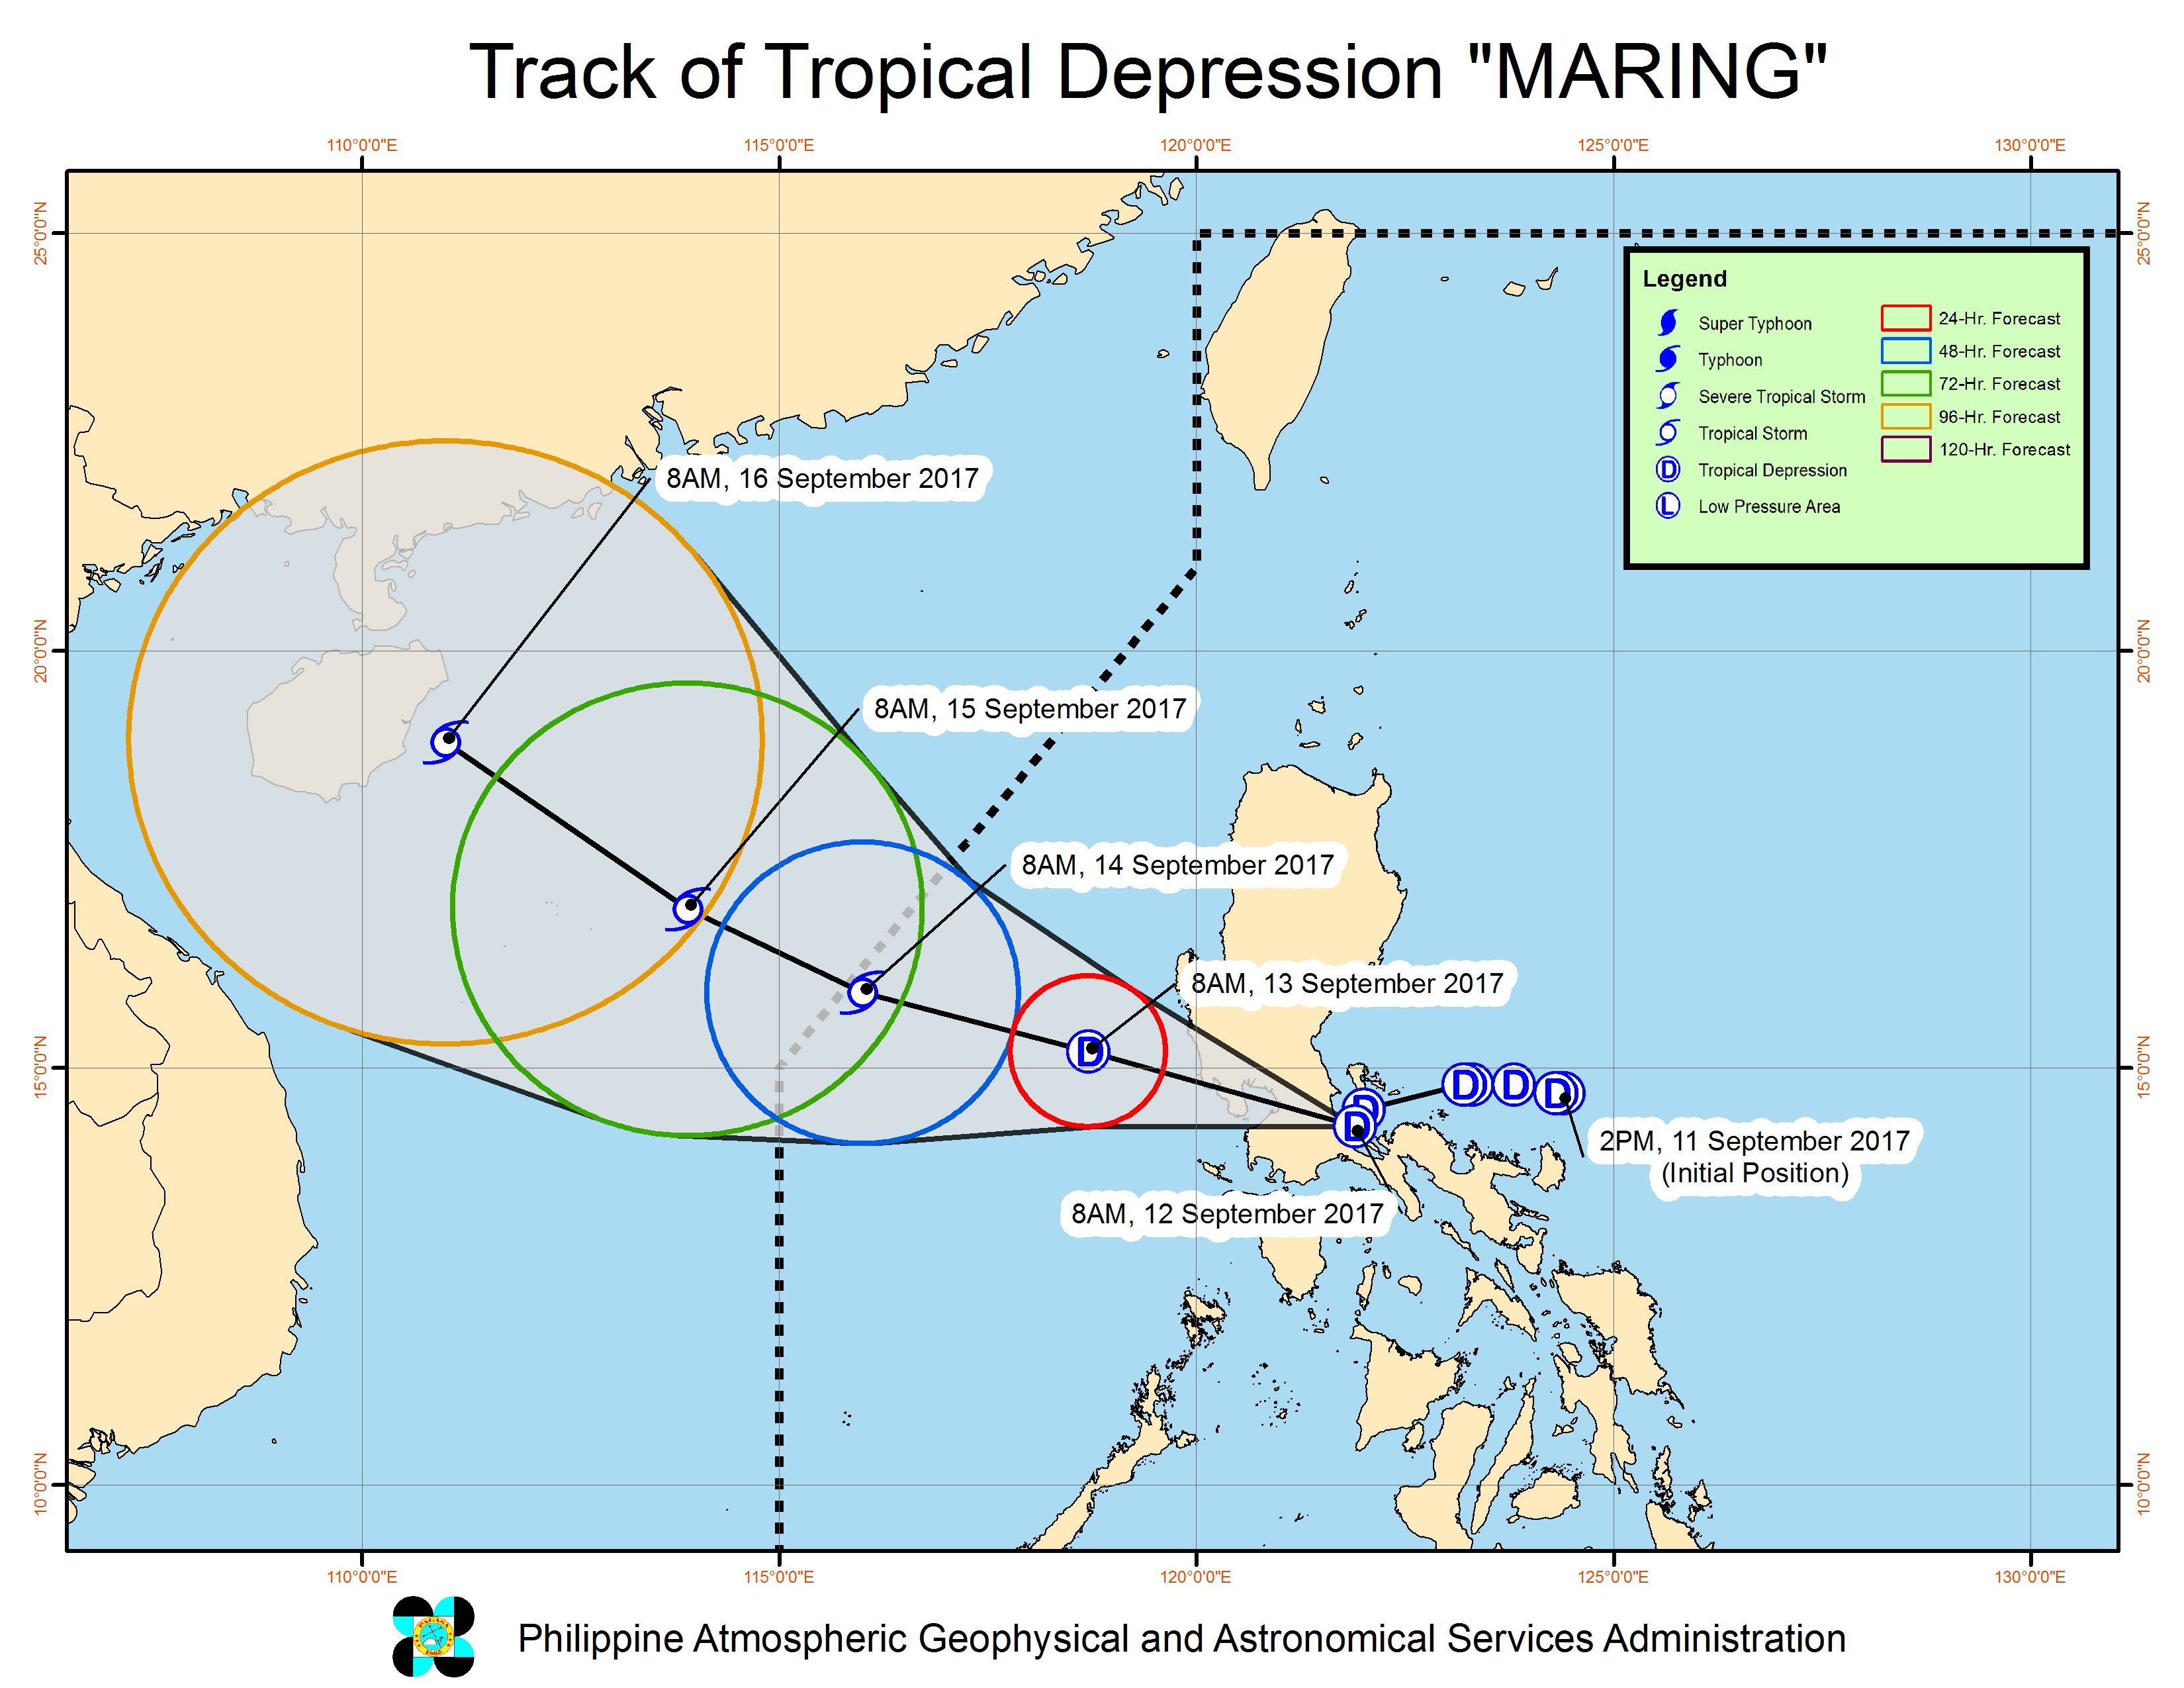 Forecast track of Tropical Depression Maring as of September 12, 11 am. Image courtesy of PAGASA 